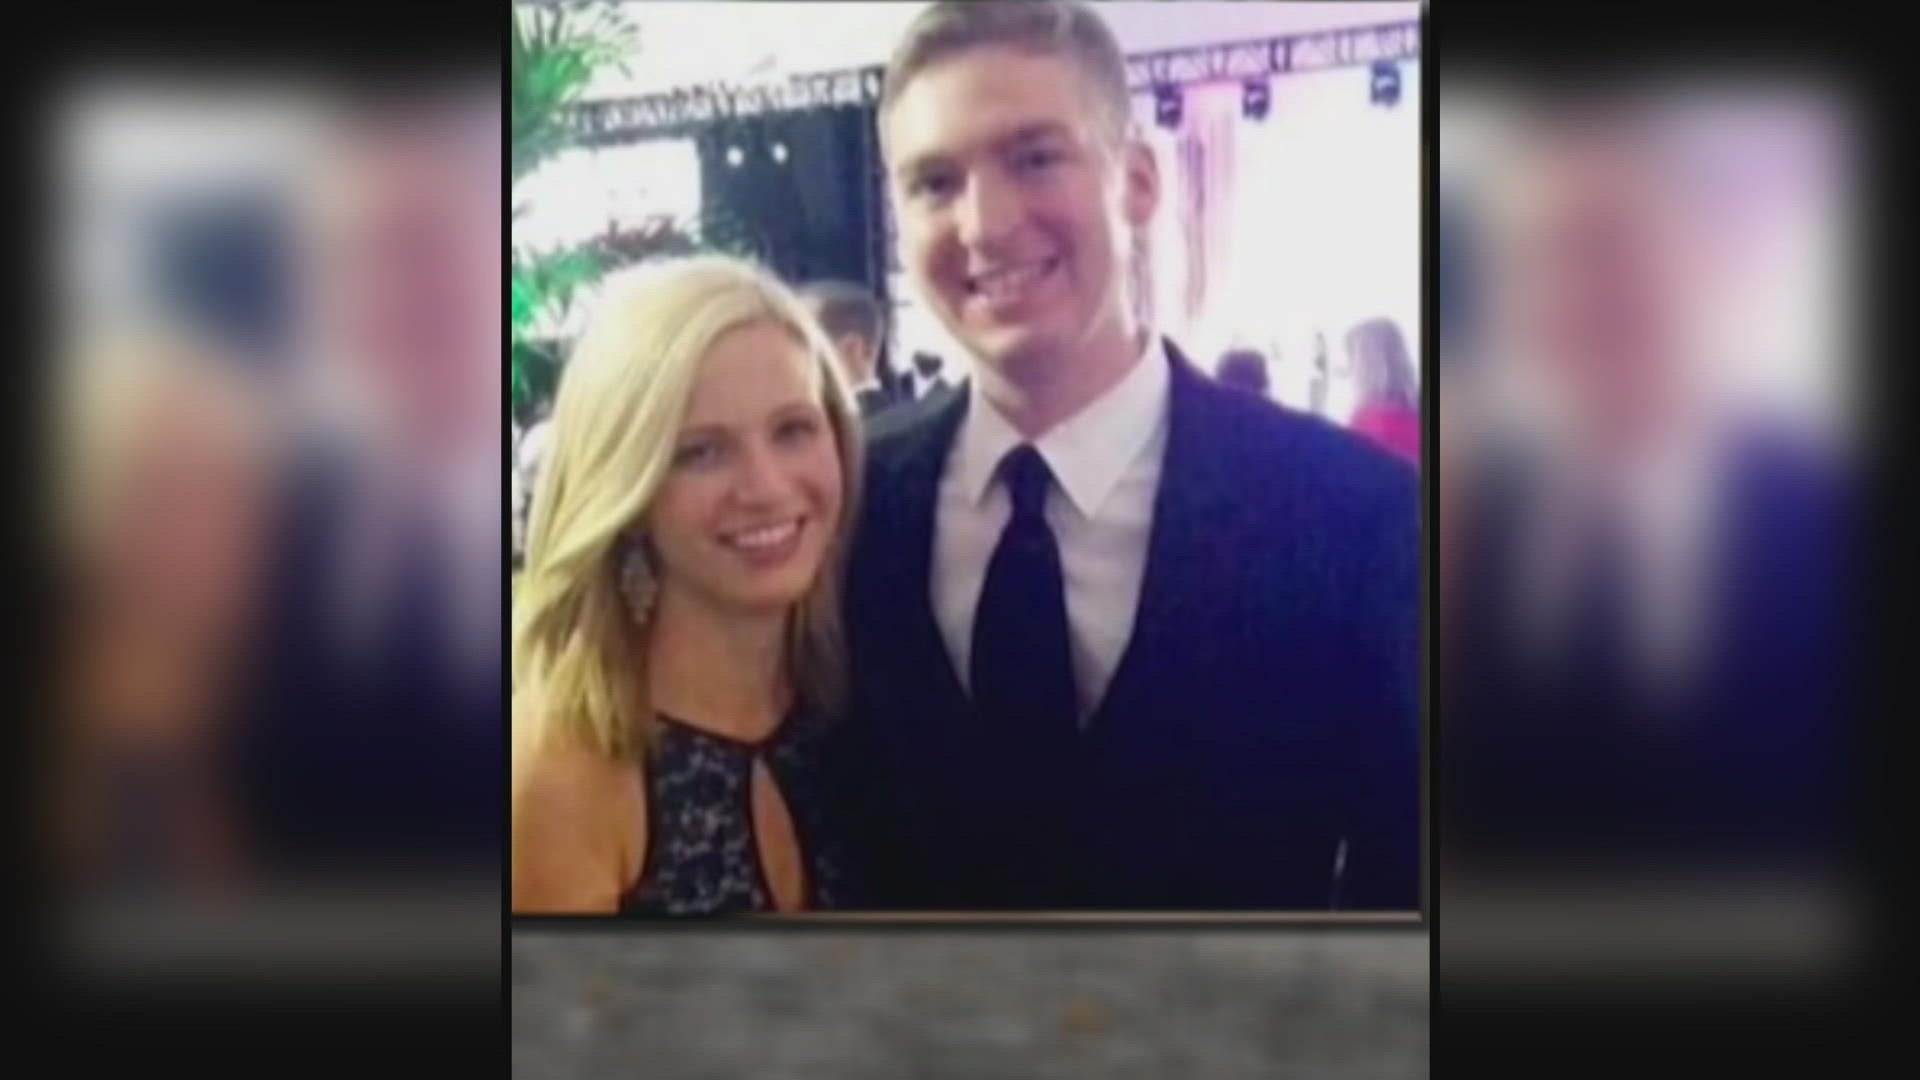 Thomas Rolfes was killed more than 5 years ago when the Tulane graduate was in town to plan his wedding.